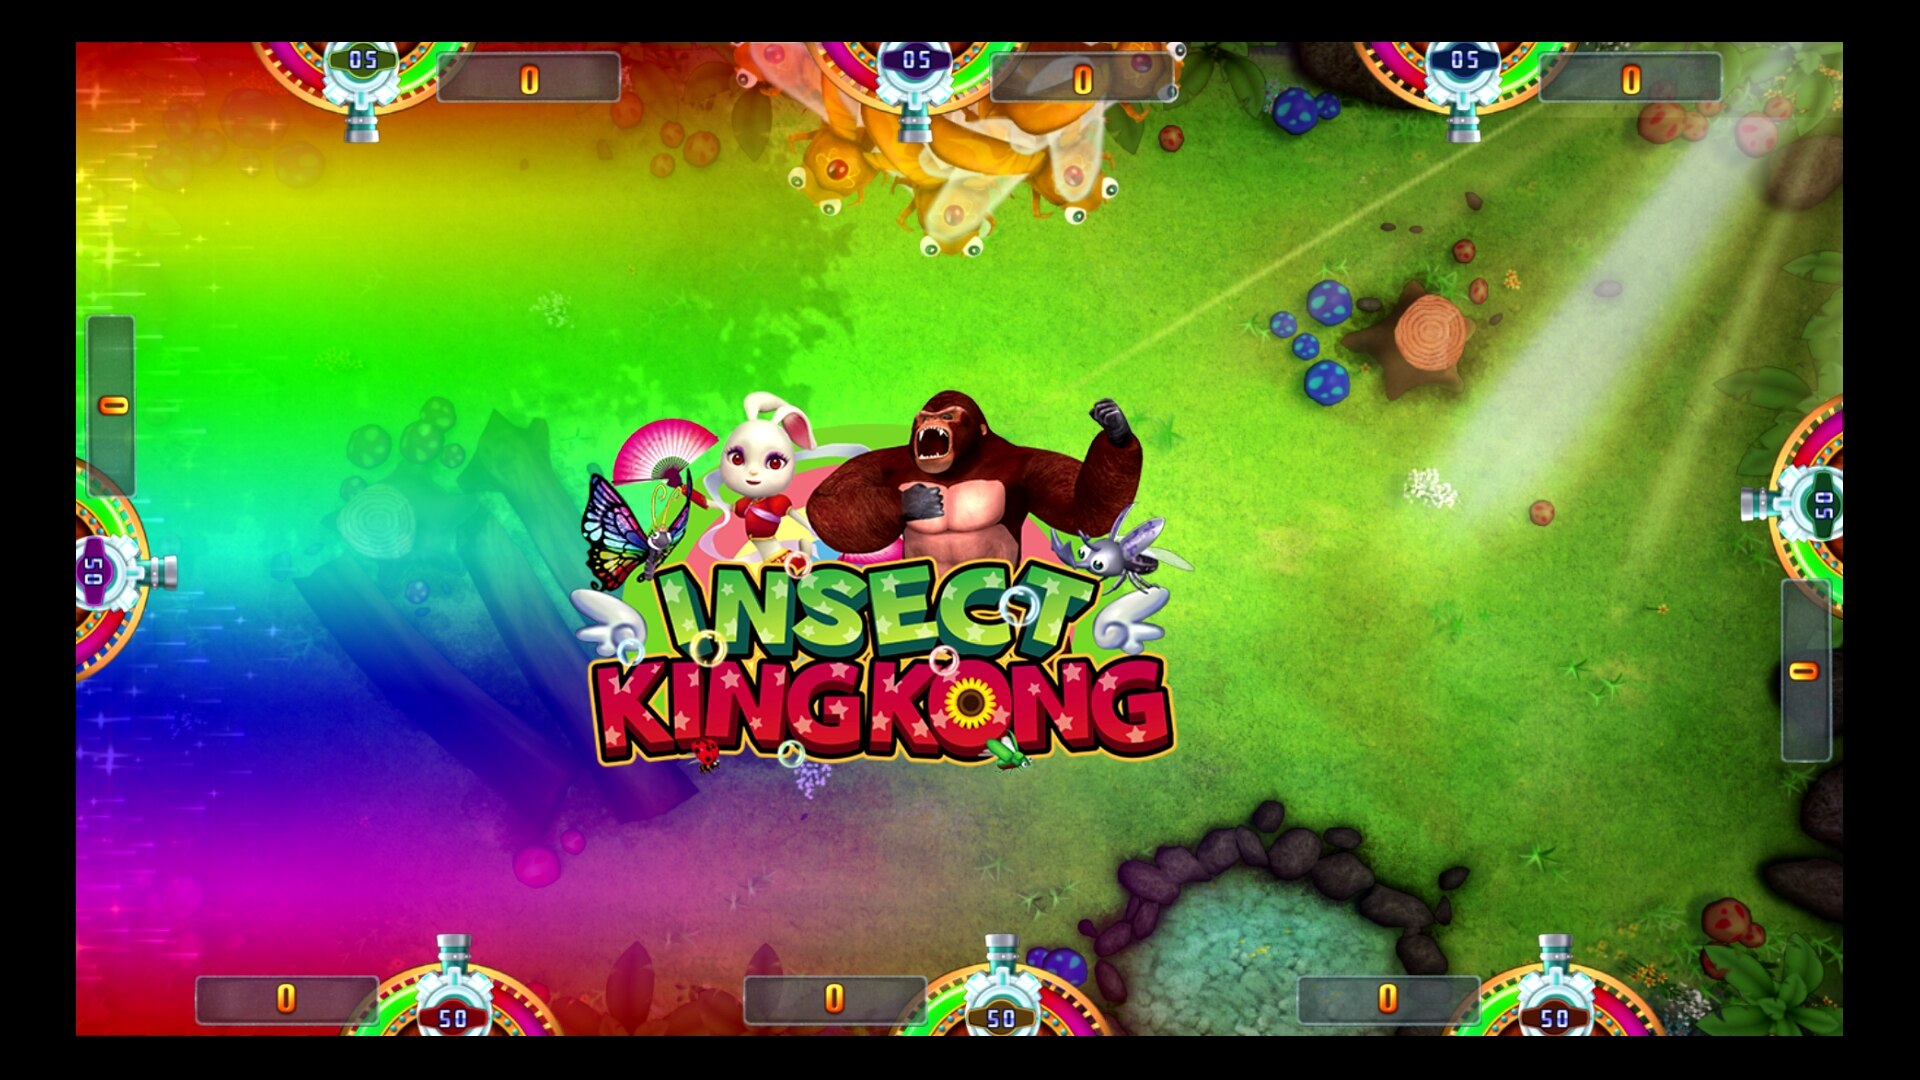 Fish Table Online Game Insect KingKong Video Game Software Arcade Game Machine  Fish Table Online Game Insect KingKong Video Game Software Arcade Game Machine  fish table online game